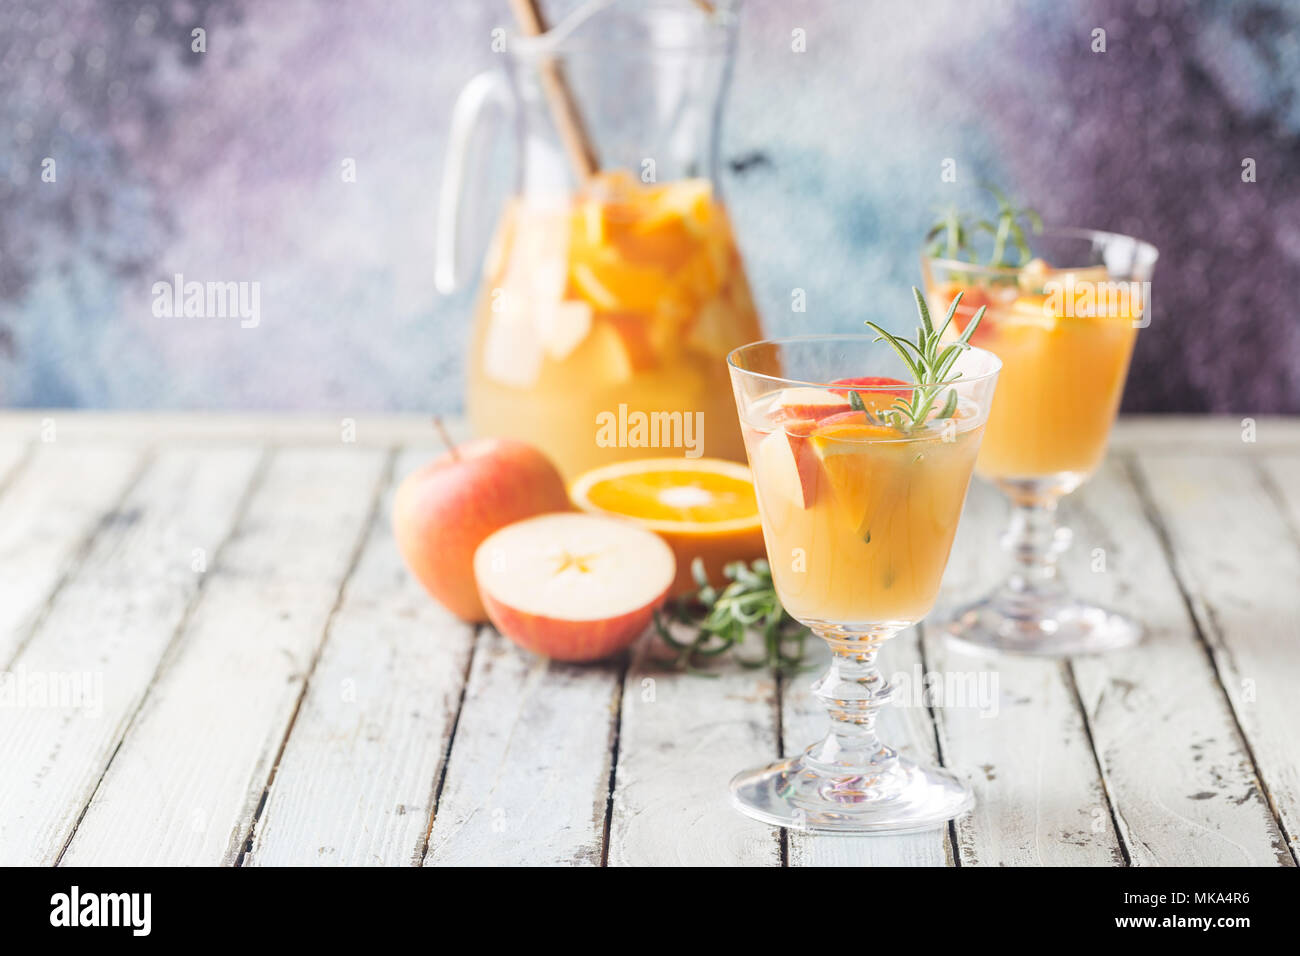 Sangria or punch with fruits Stock Photo